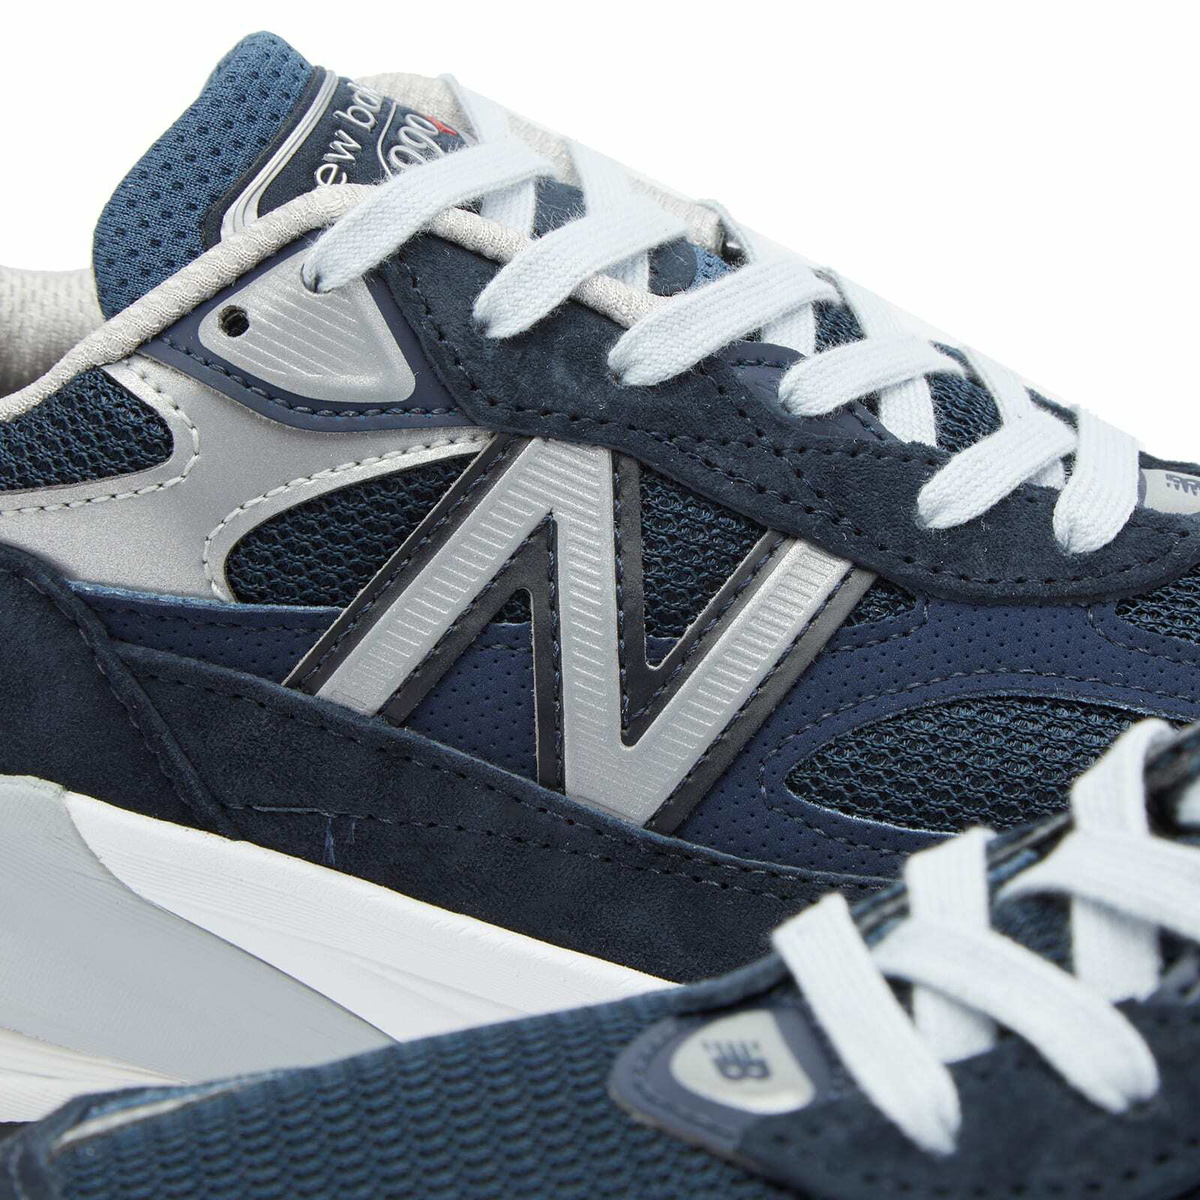 New Balance Women's W990NV6 - Made in USA Sneakers in Navy New Balance